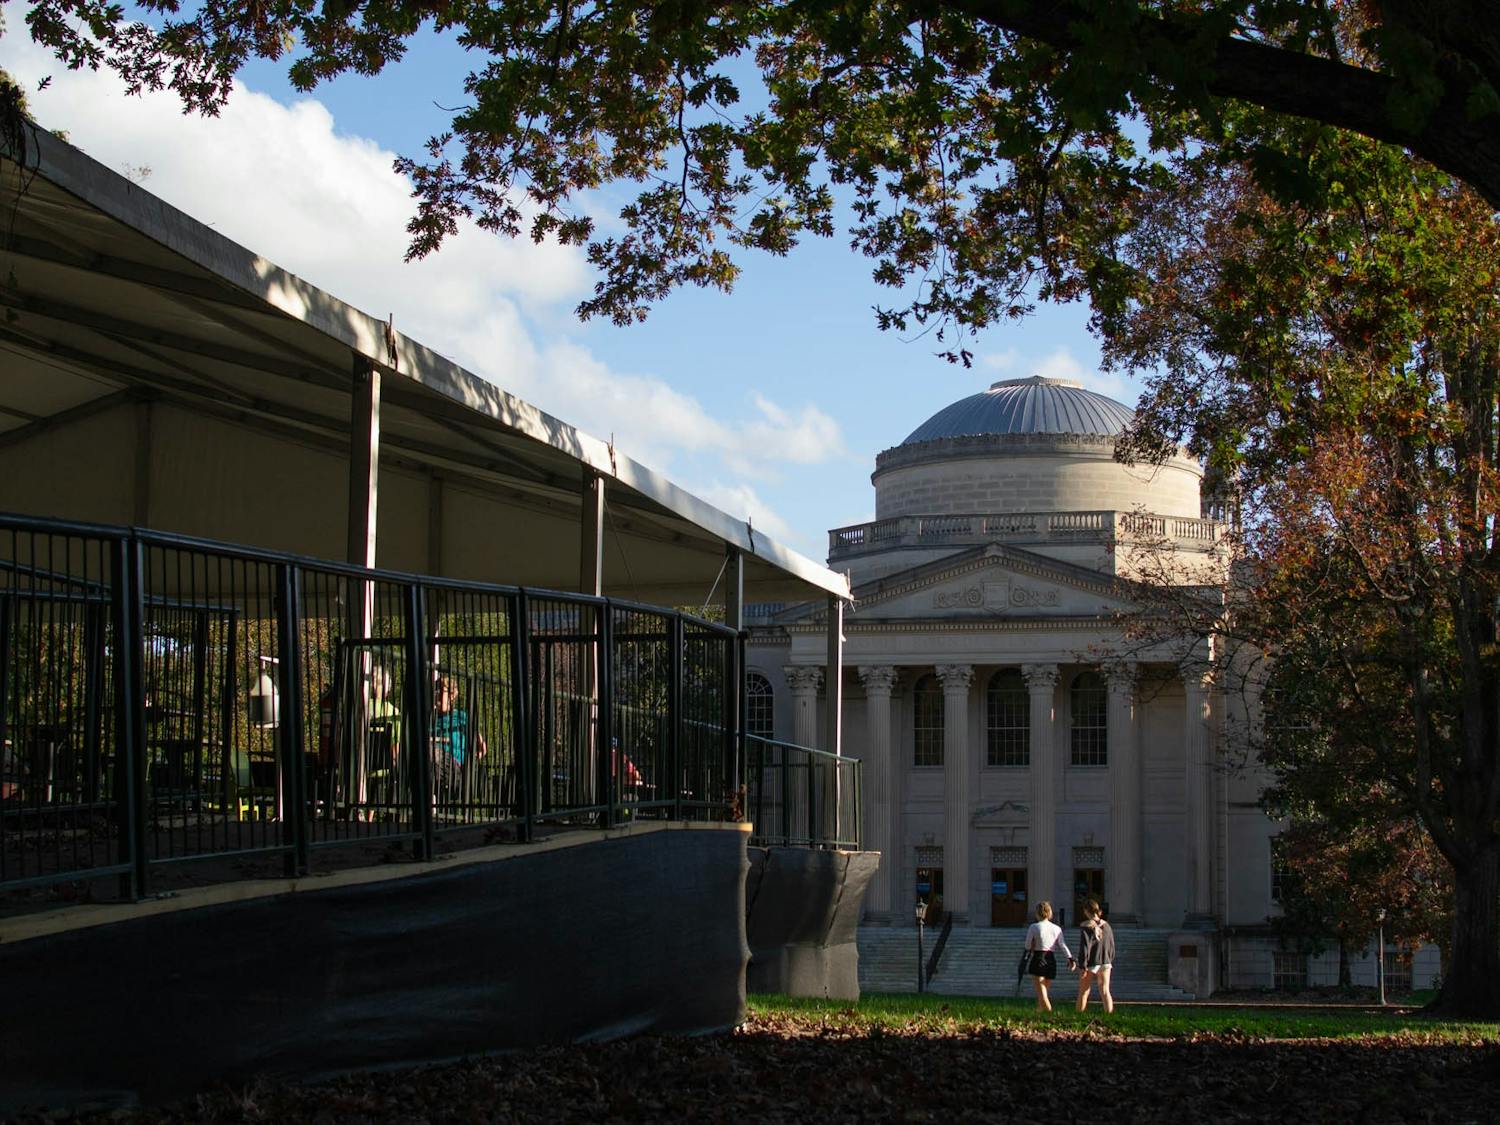 Students study at the outdoor and socially-distanced study area the University built on Polk Place as other students walk past Wilson Library on Sunday, Nov. 15, 2020.